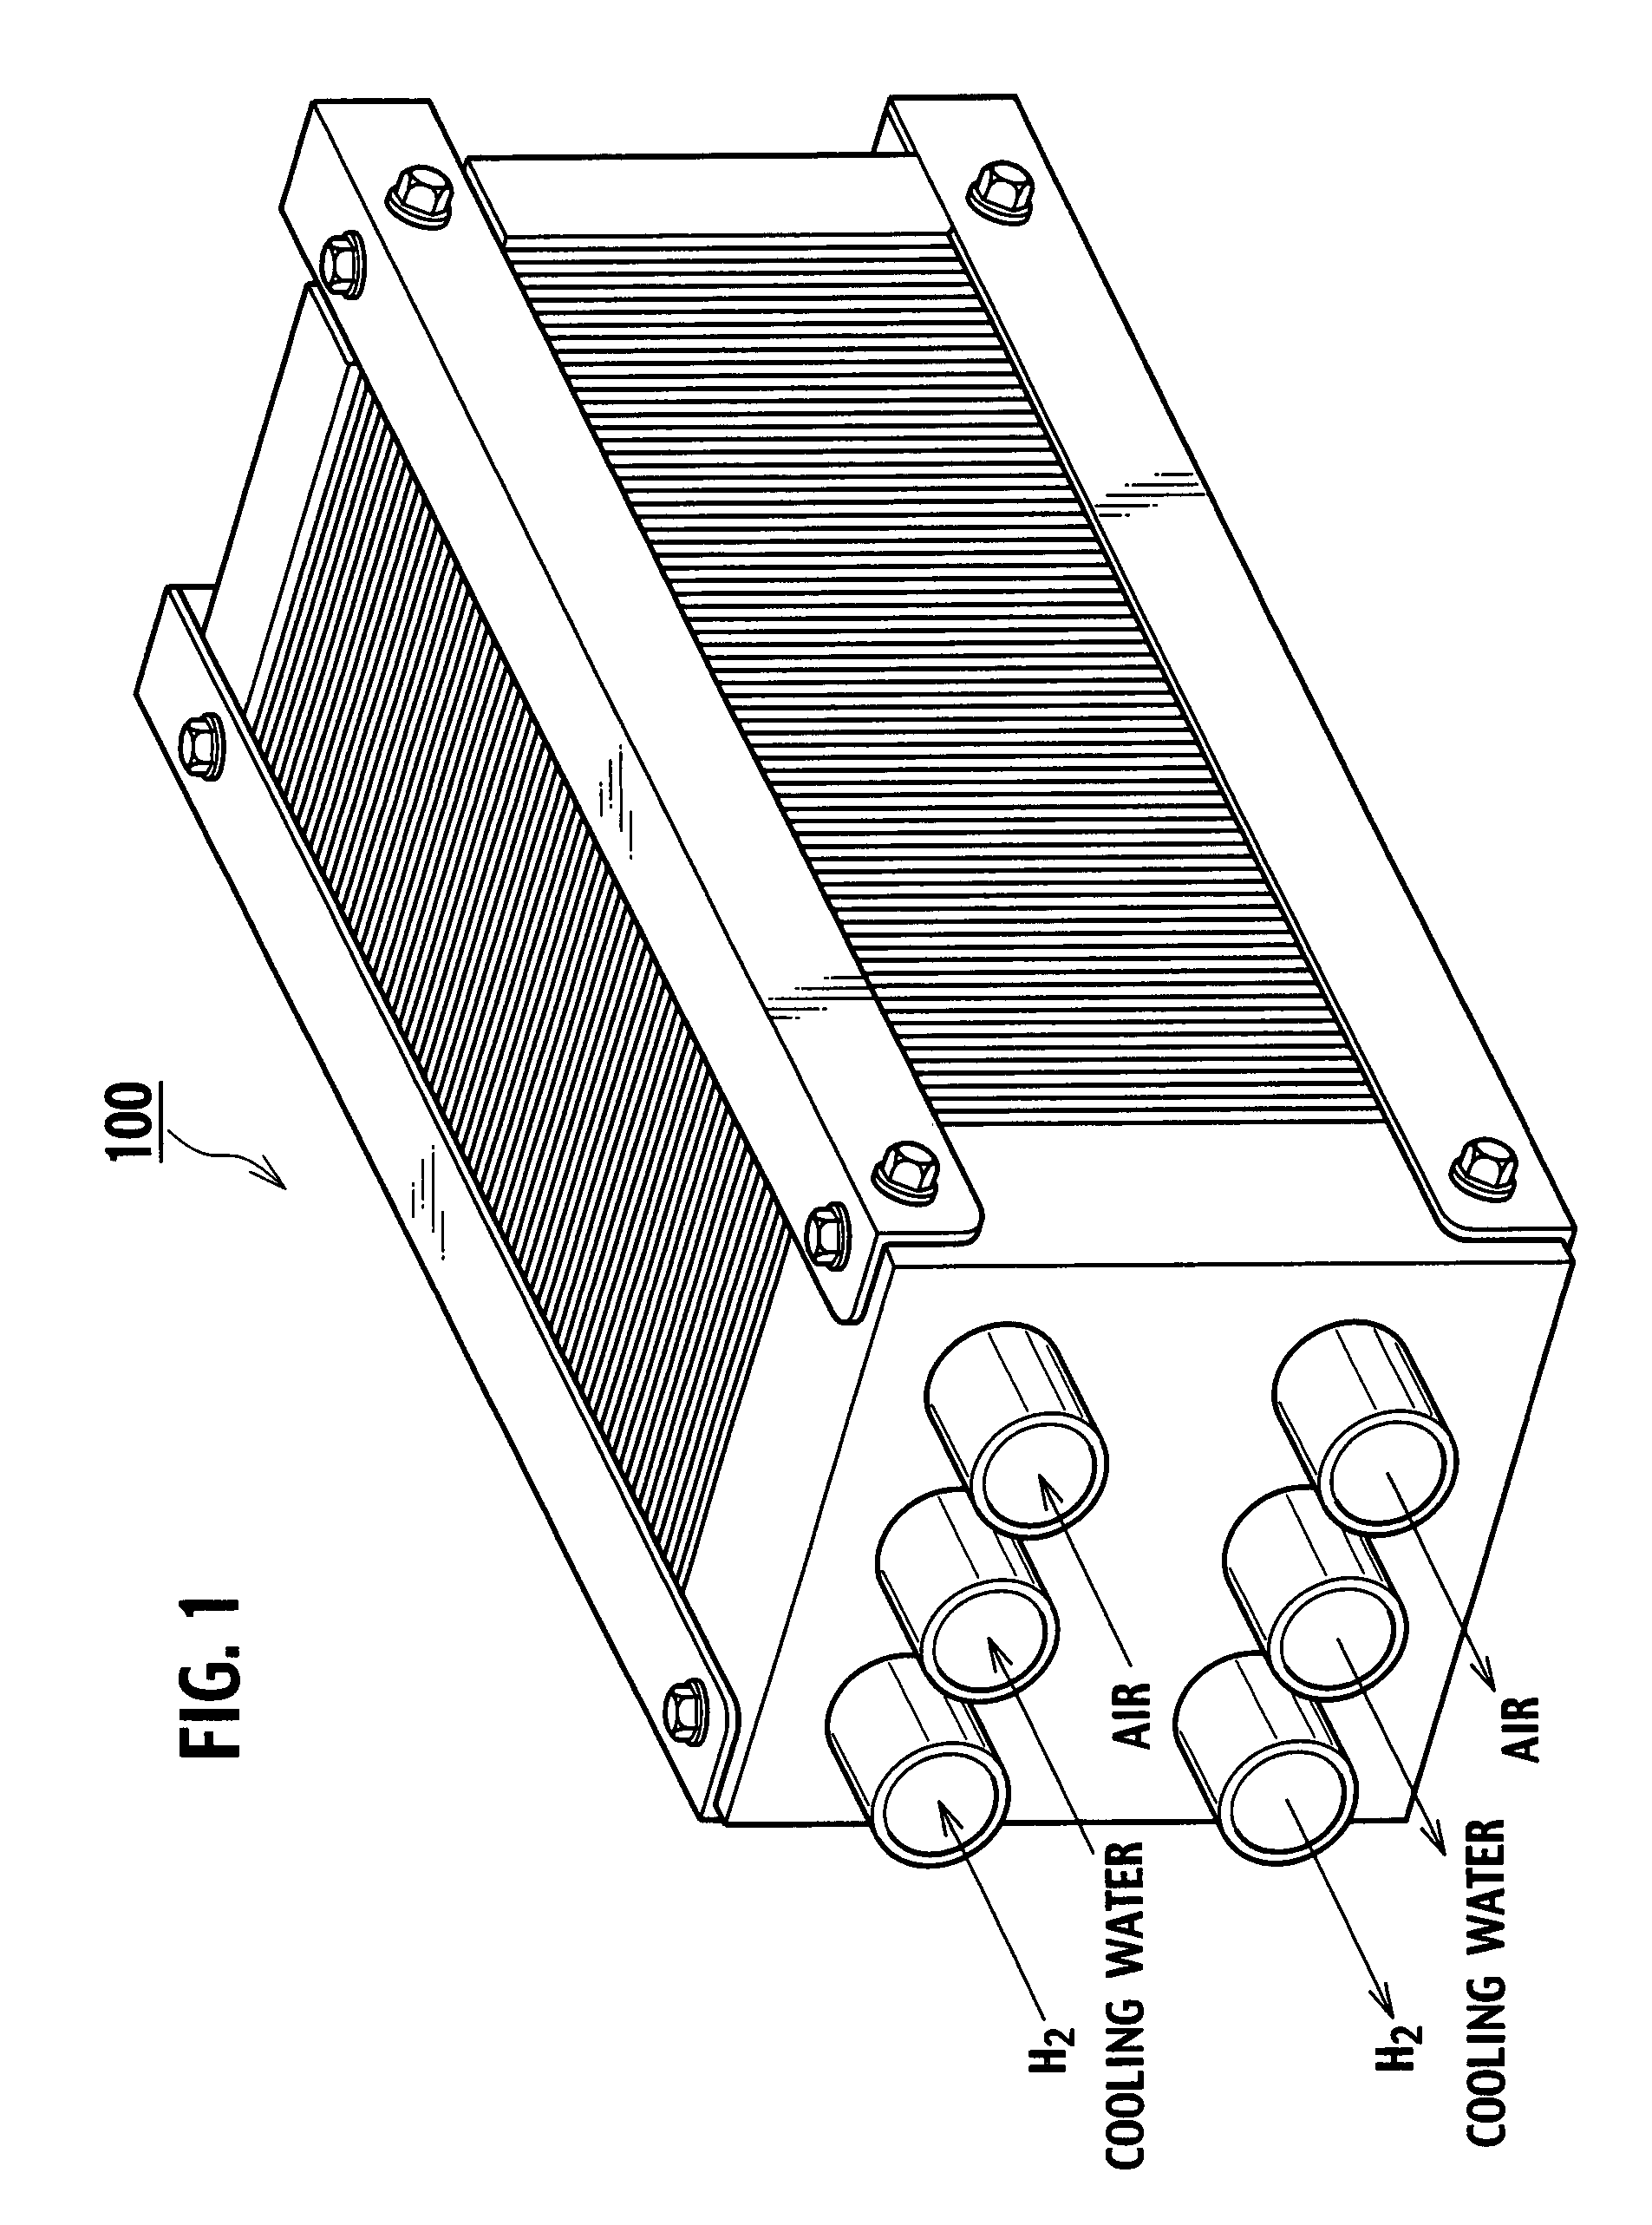 Polymer Electrolyte Fuel Cell